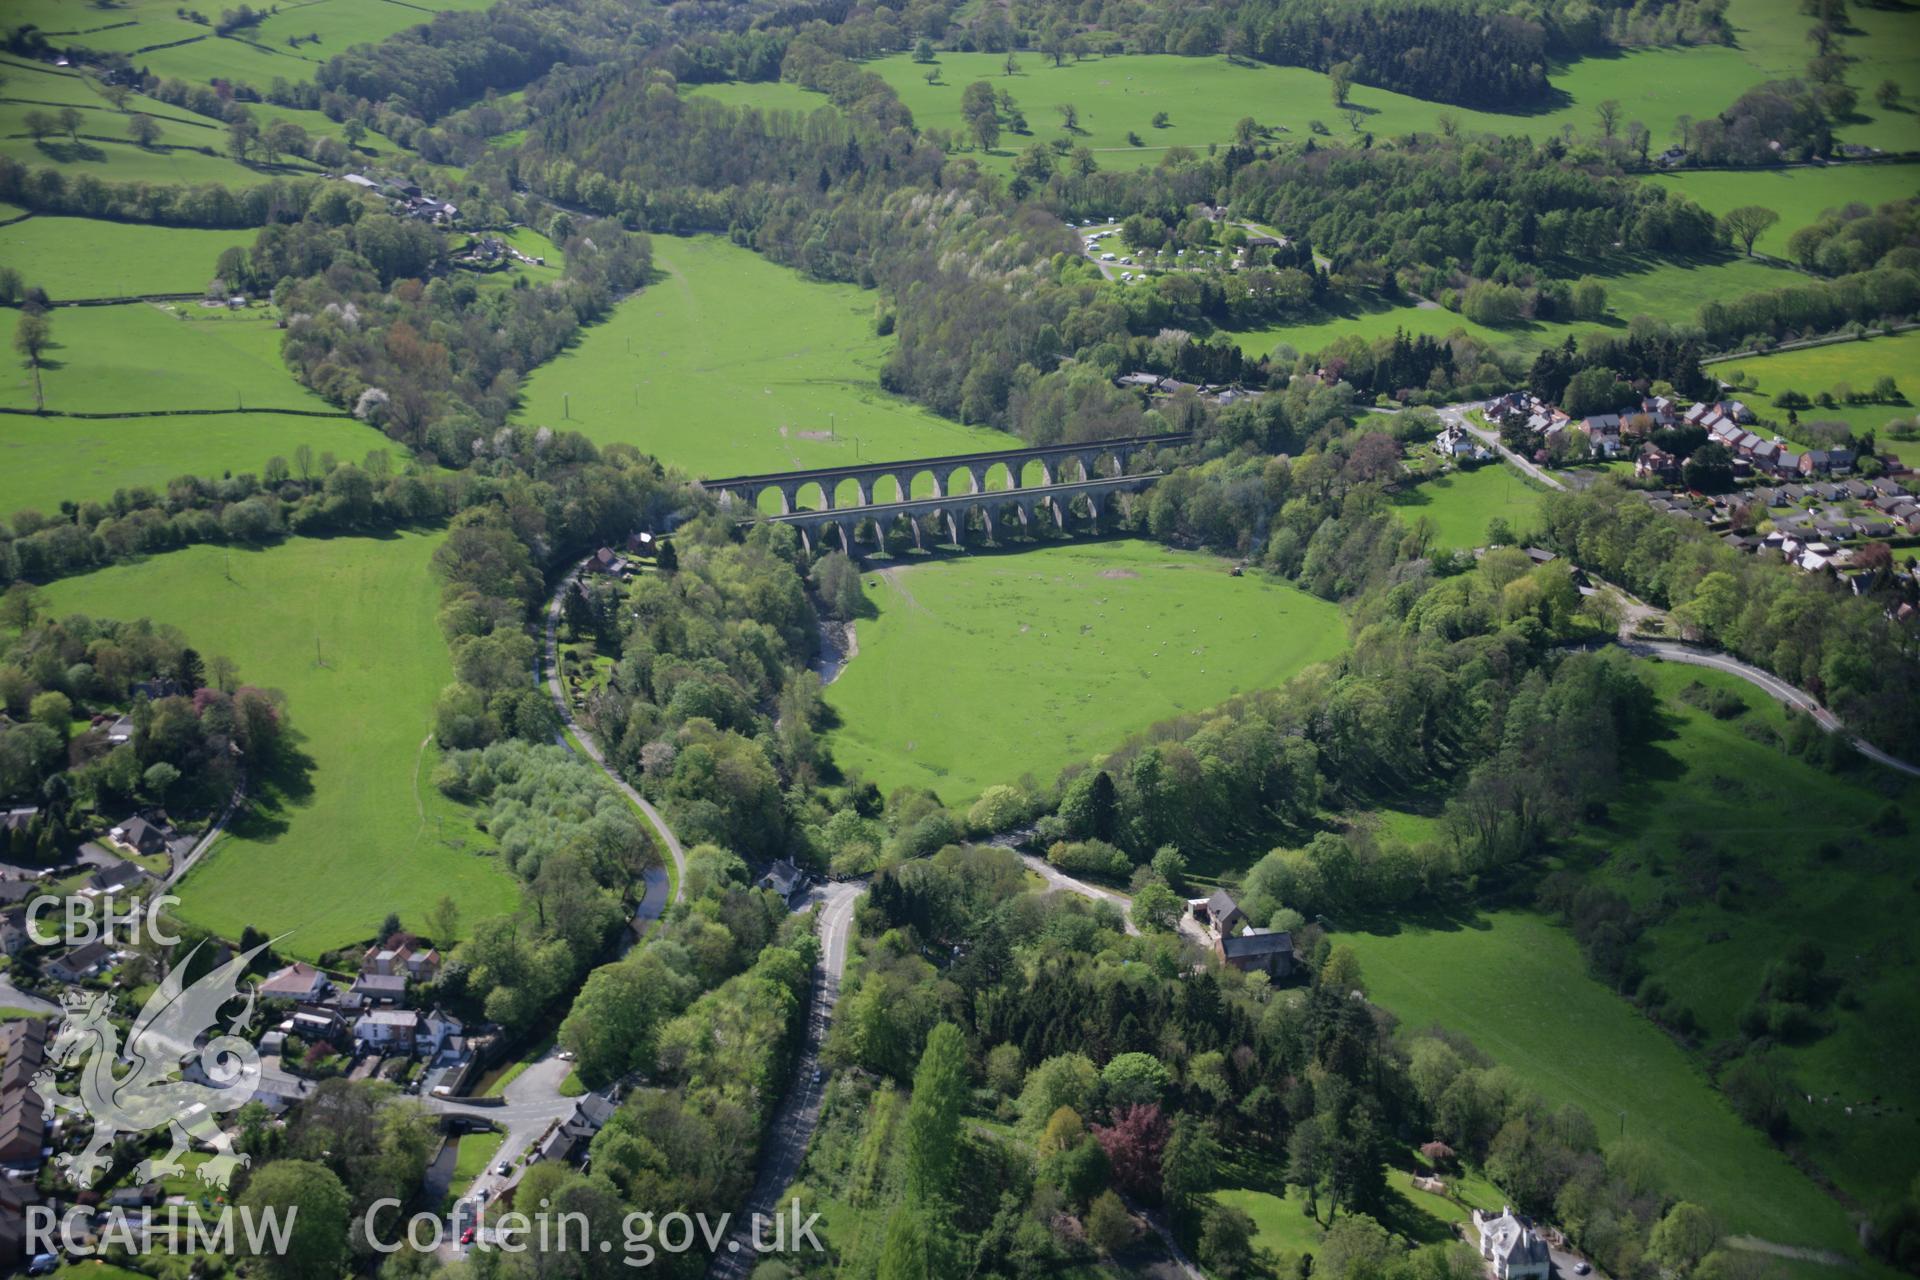 RCAHMW digital colour oblique photograph of the Chirk Railway Viaduct and the Llangollen Canal aqueduct from the east. Taken on 05/05/2006 by T.G. Driver.